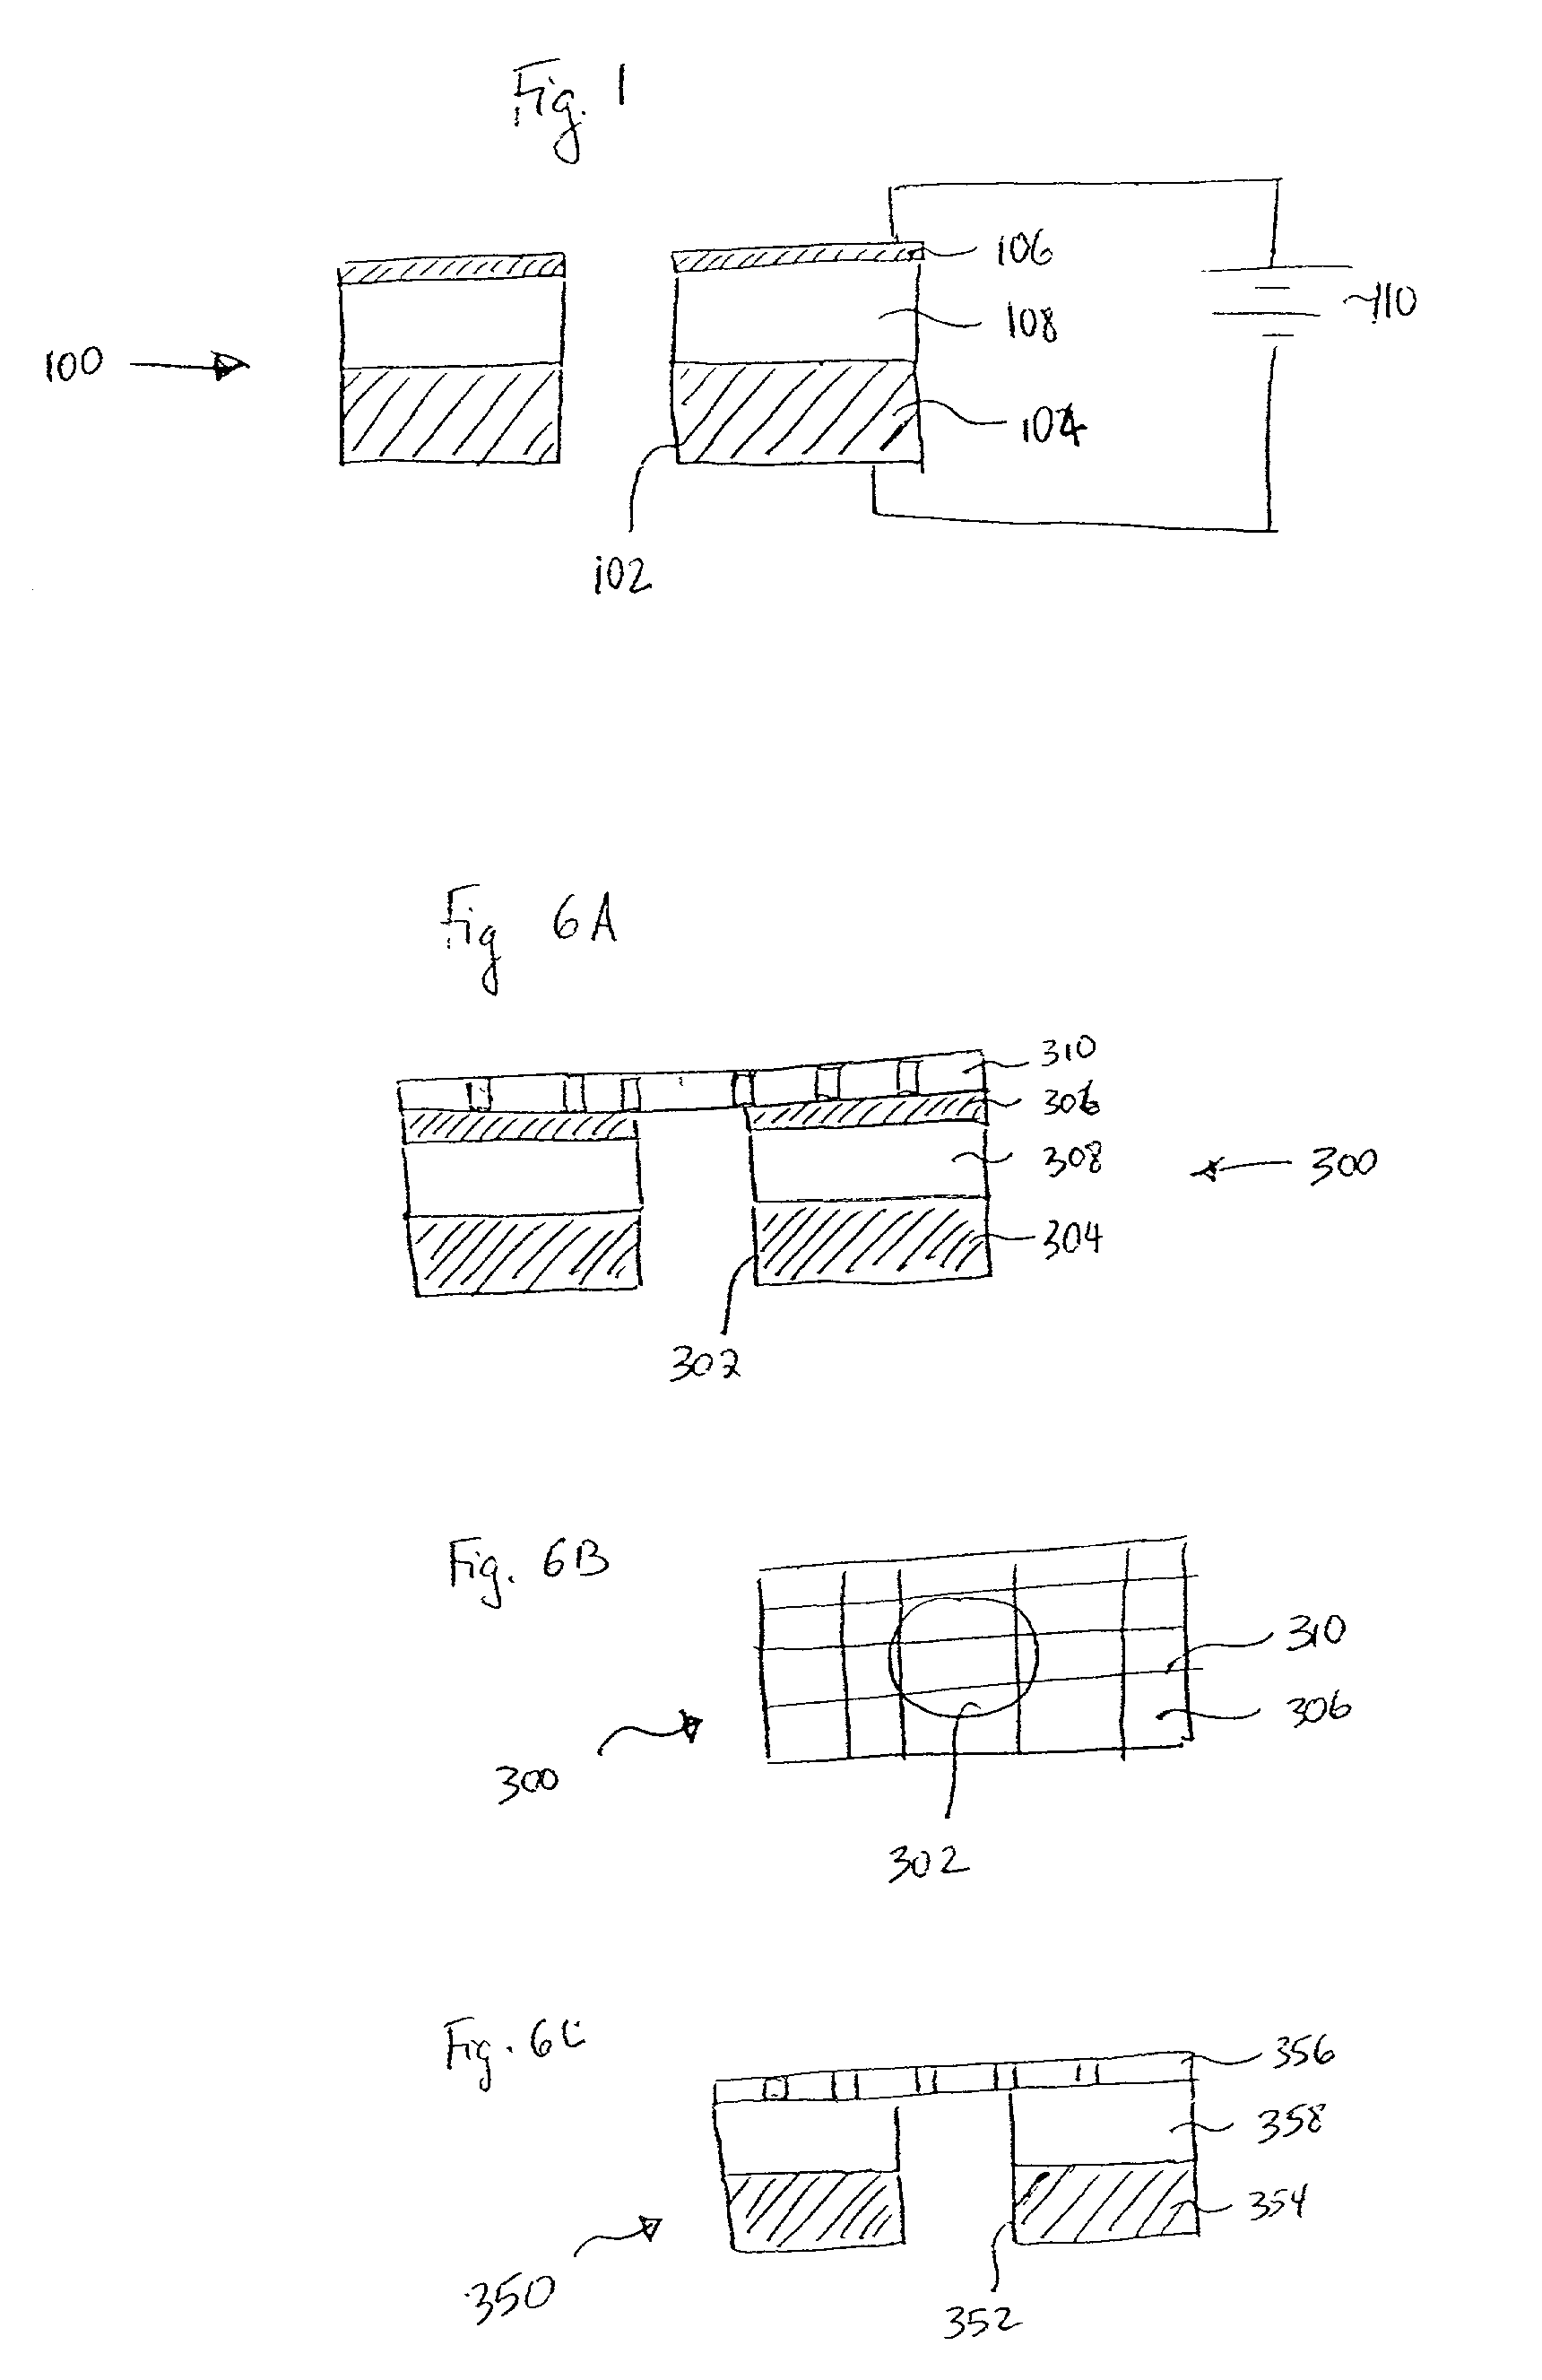 Microdischarge devices and arrays